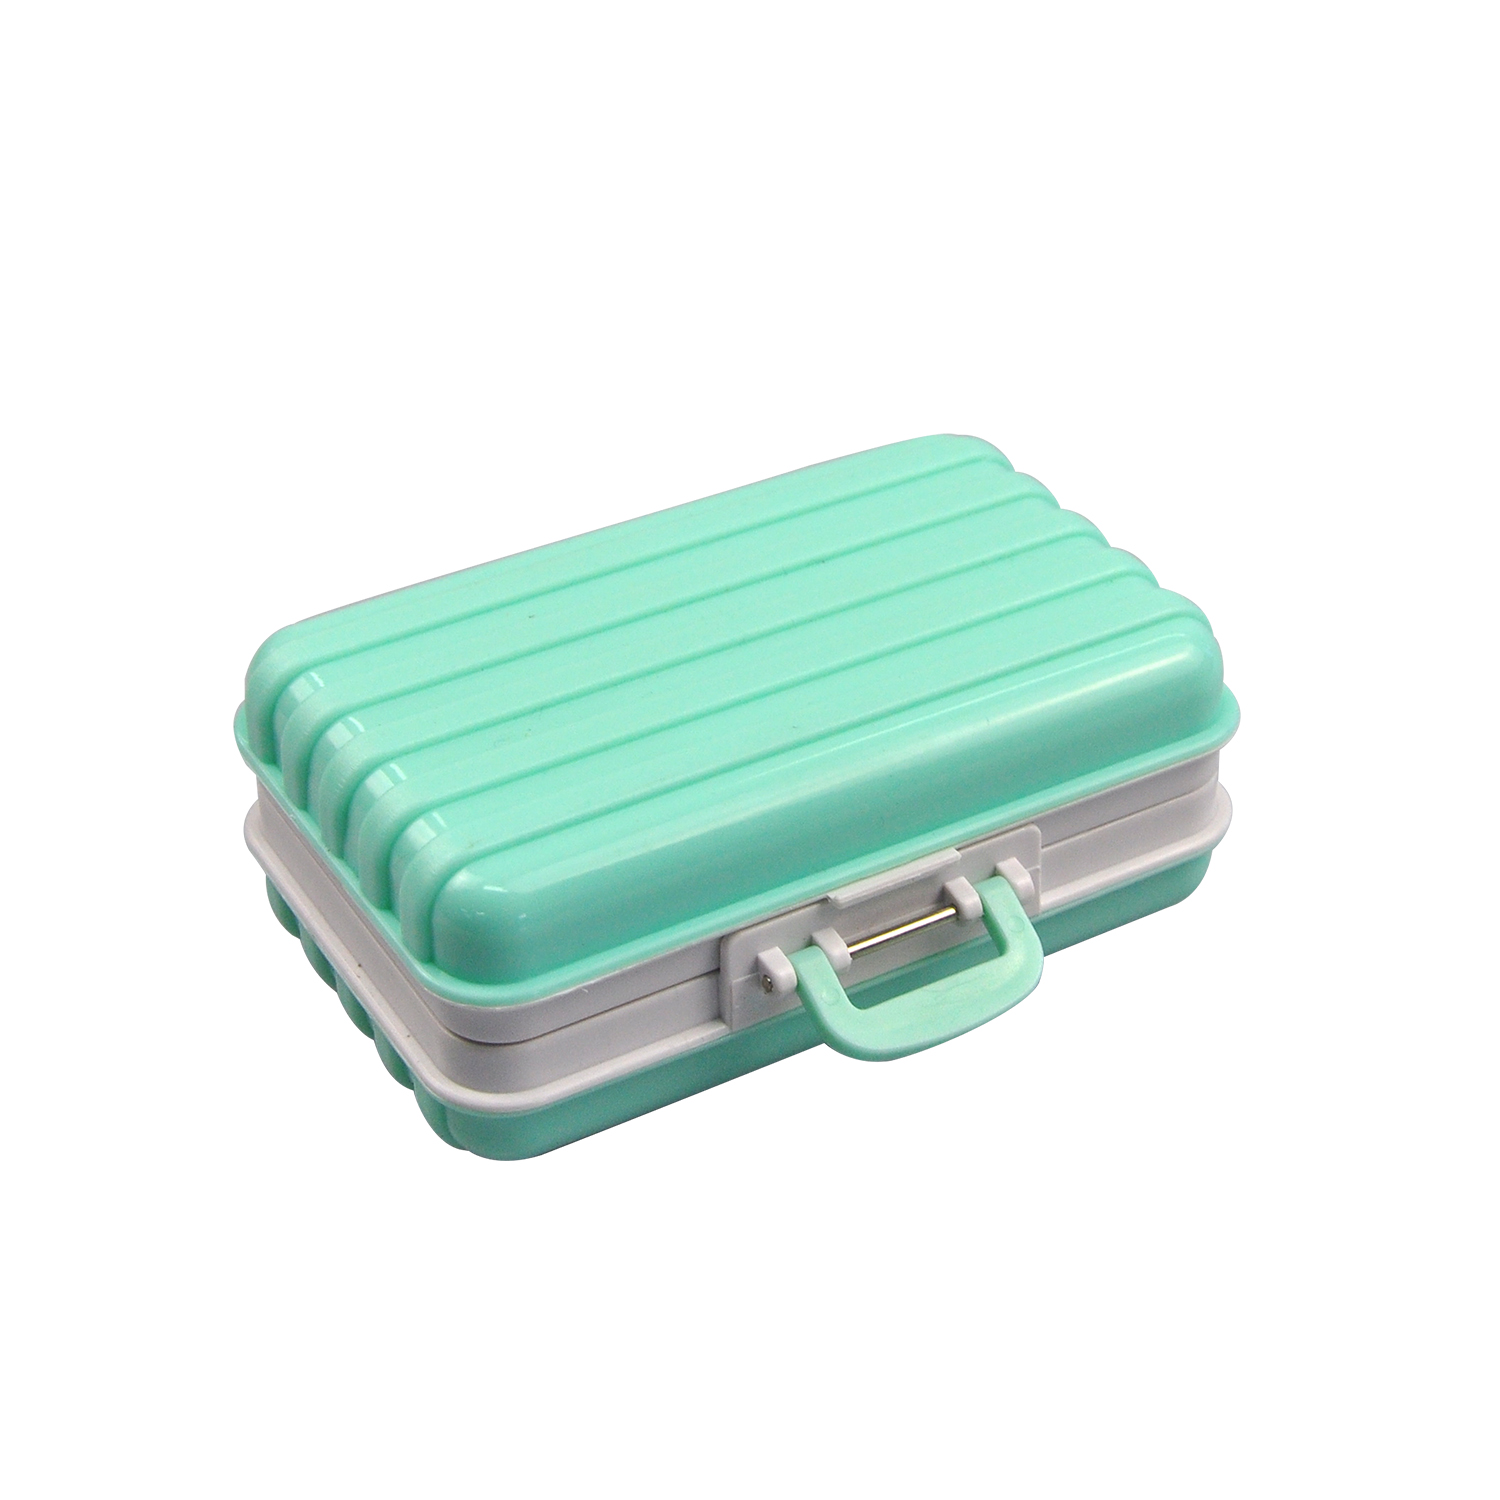 Small Suitcase-shape Portable Medicine Box with 6 Compartments